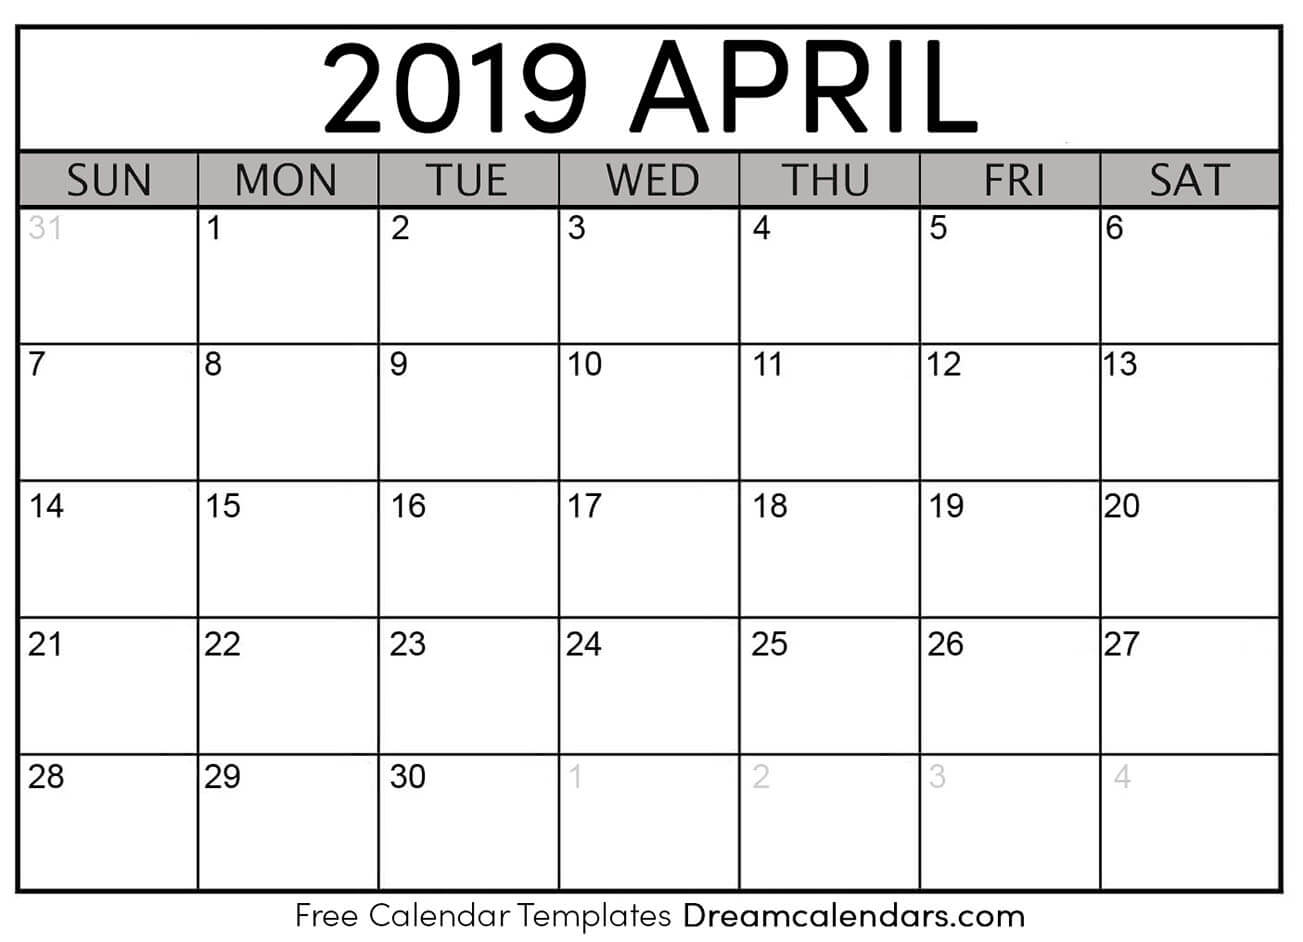 How To Get A Printed Or Printable Calendar For April 2019 Quora